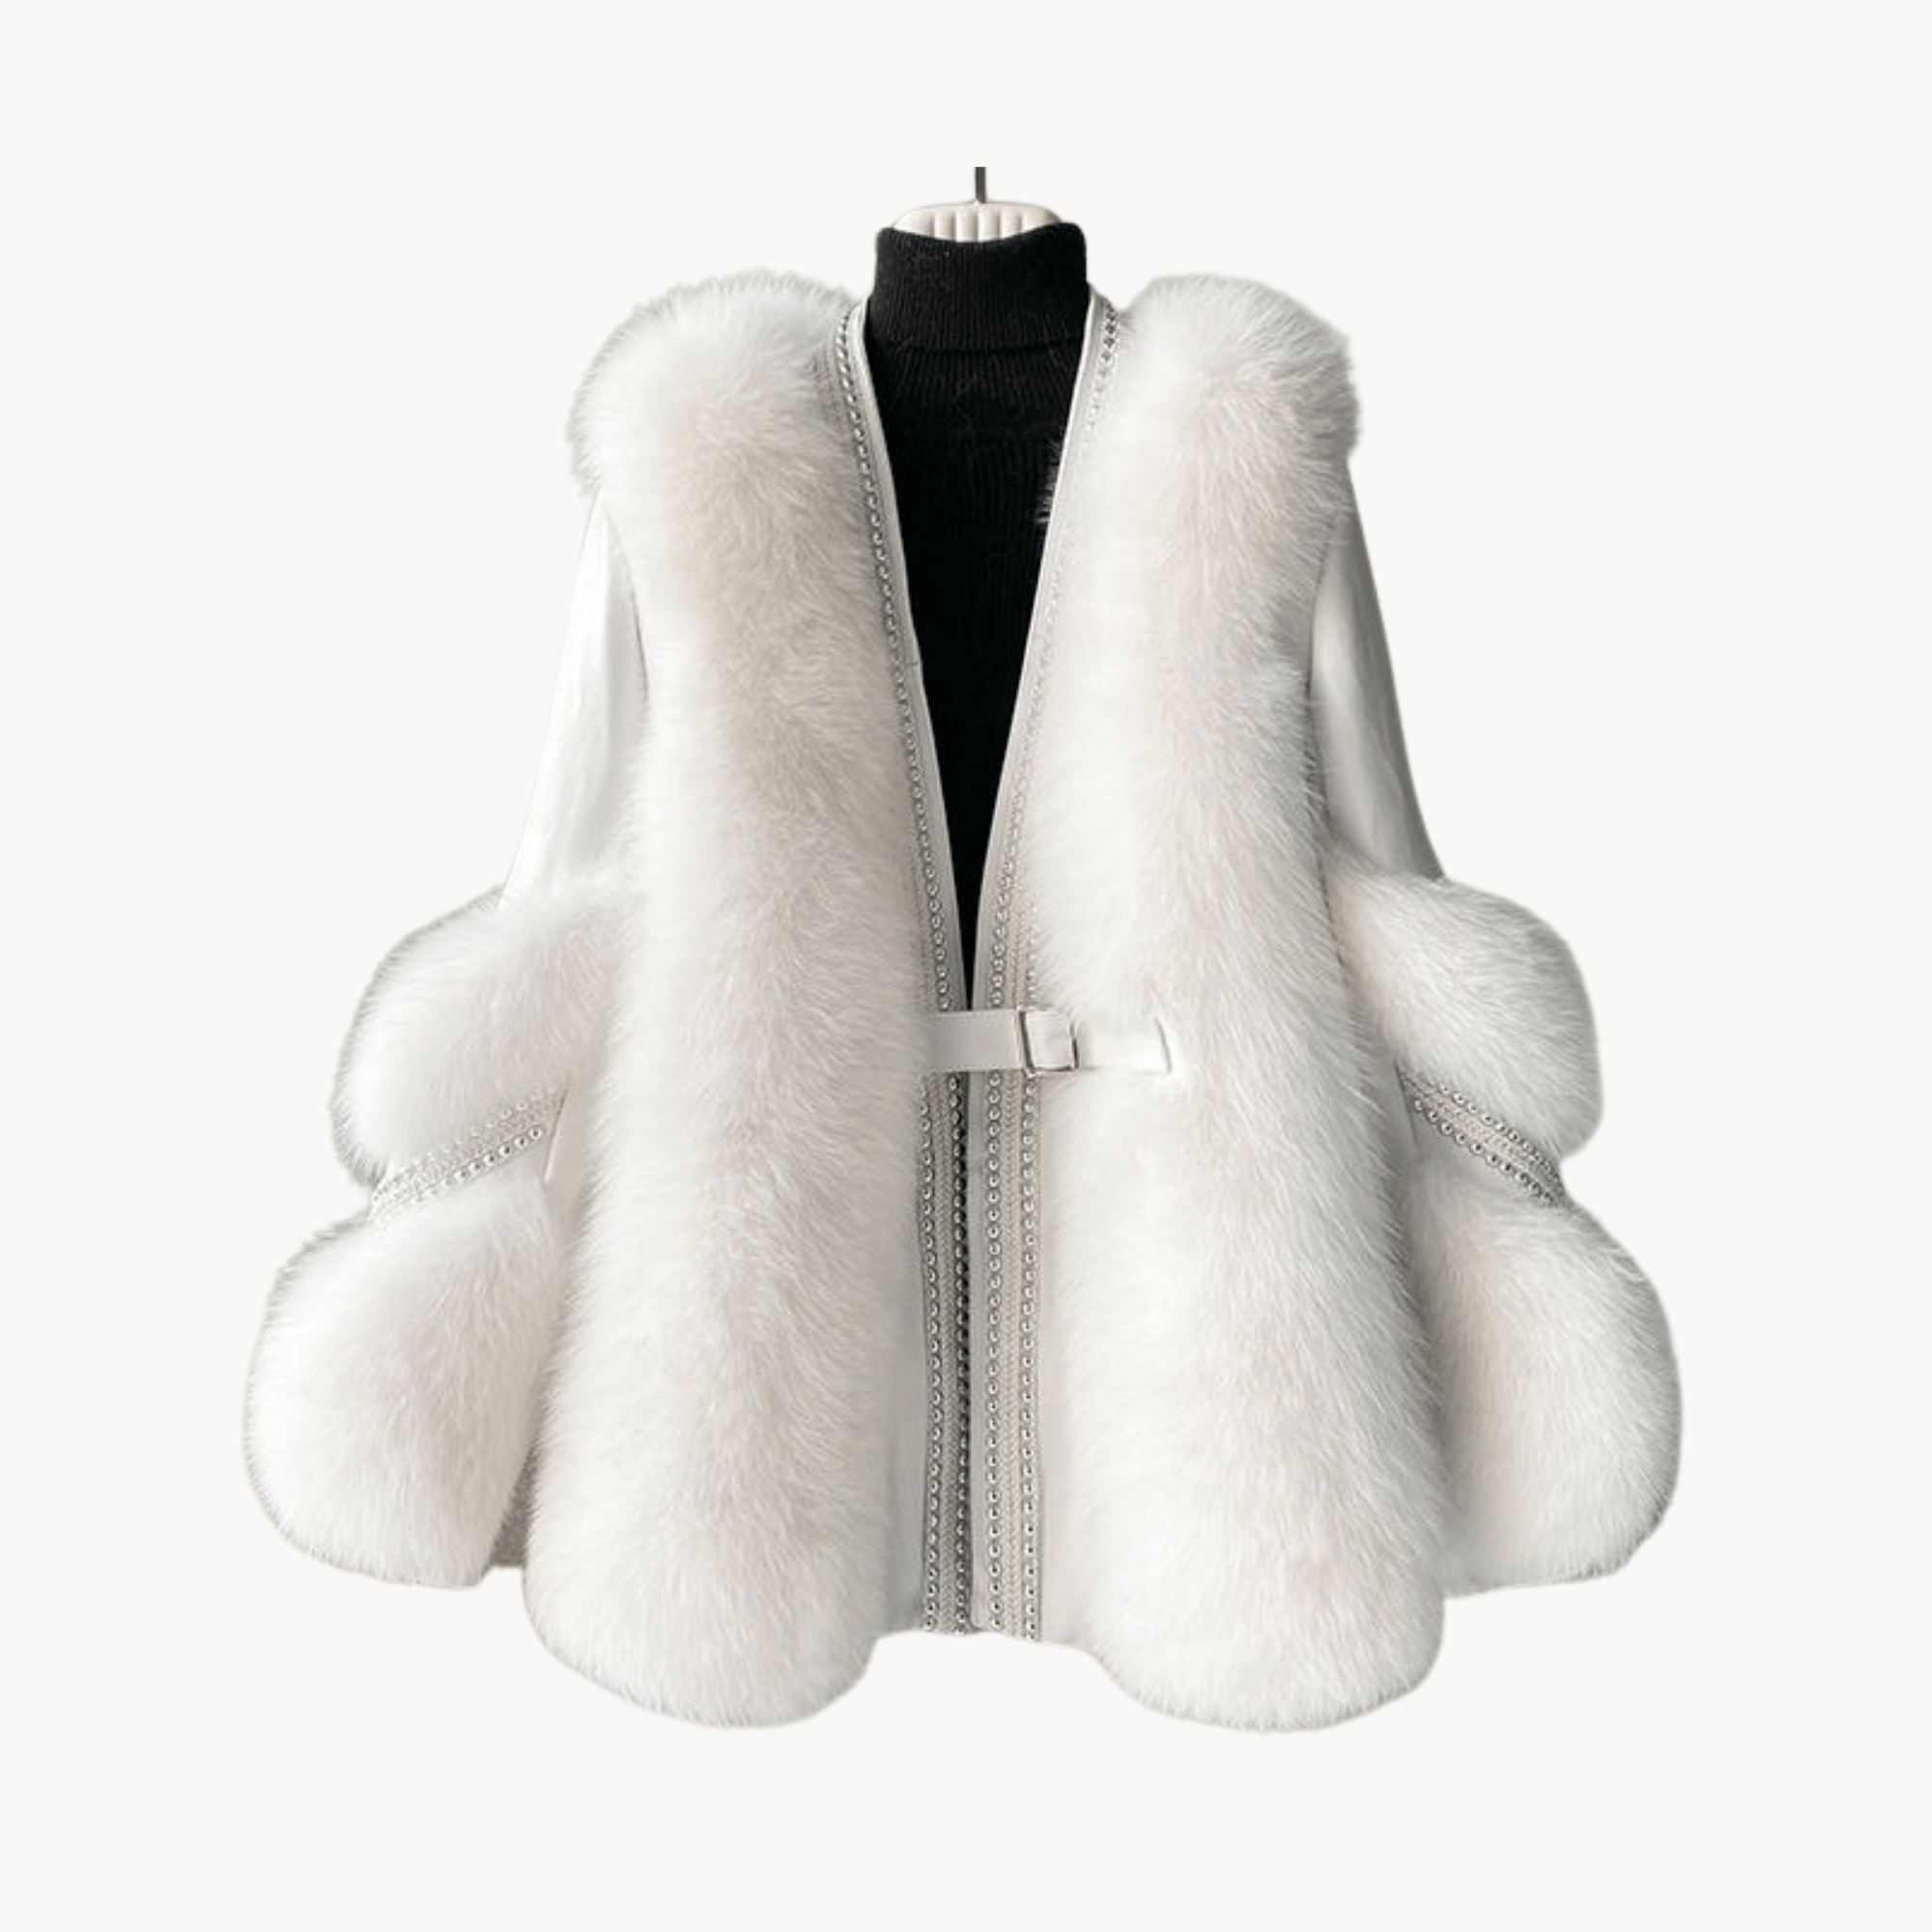 Spliced Faux Fur and Leather Coat - Kelly Obi New York